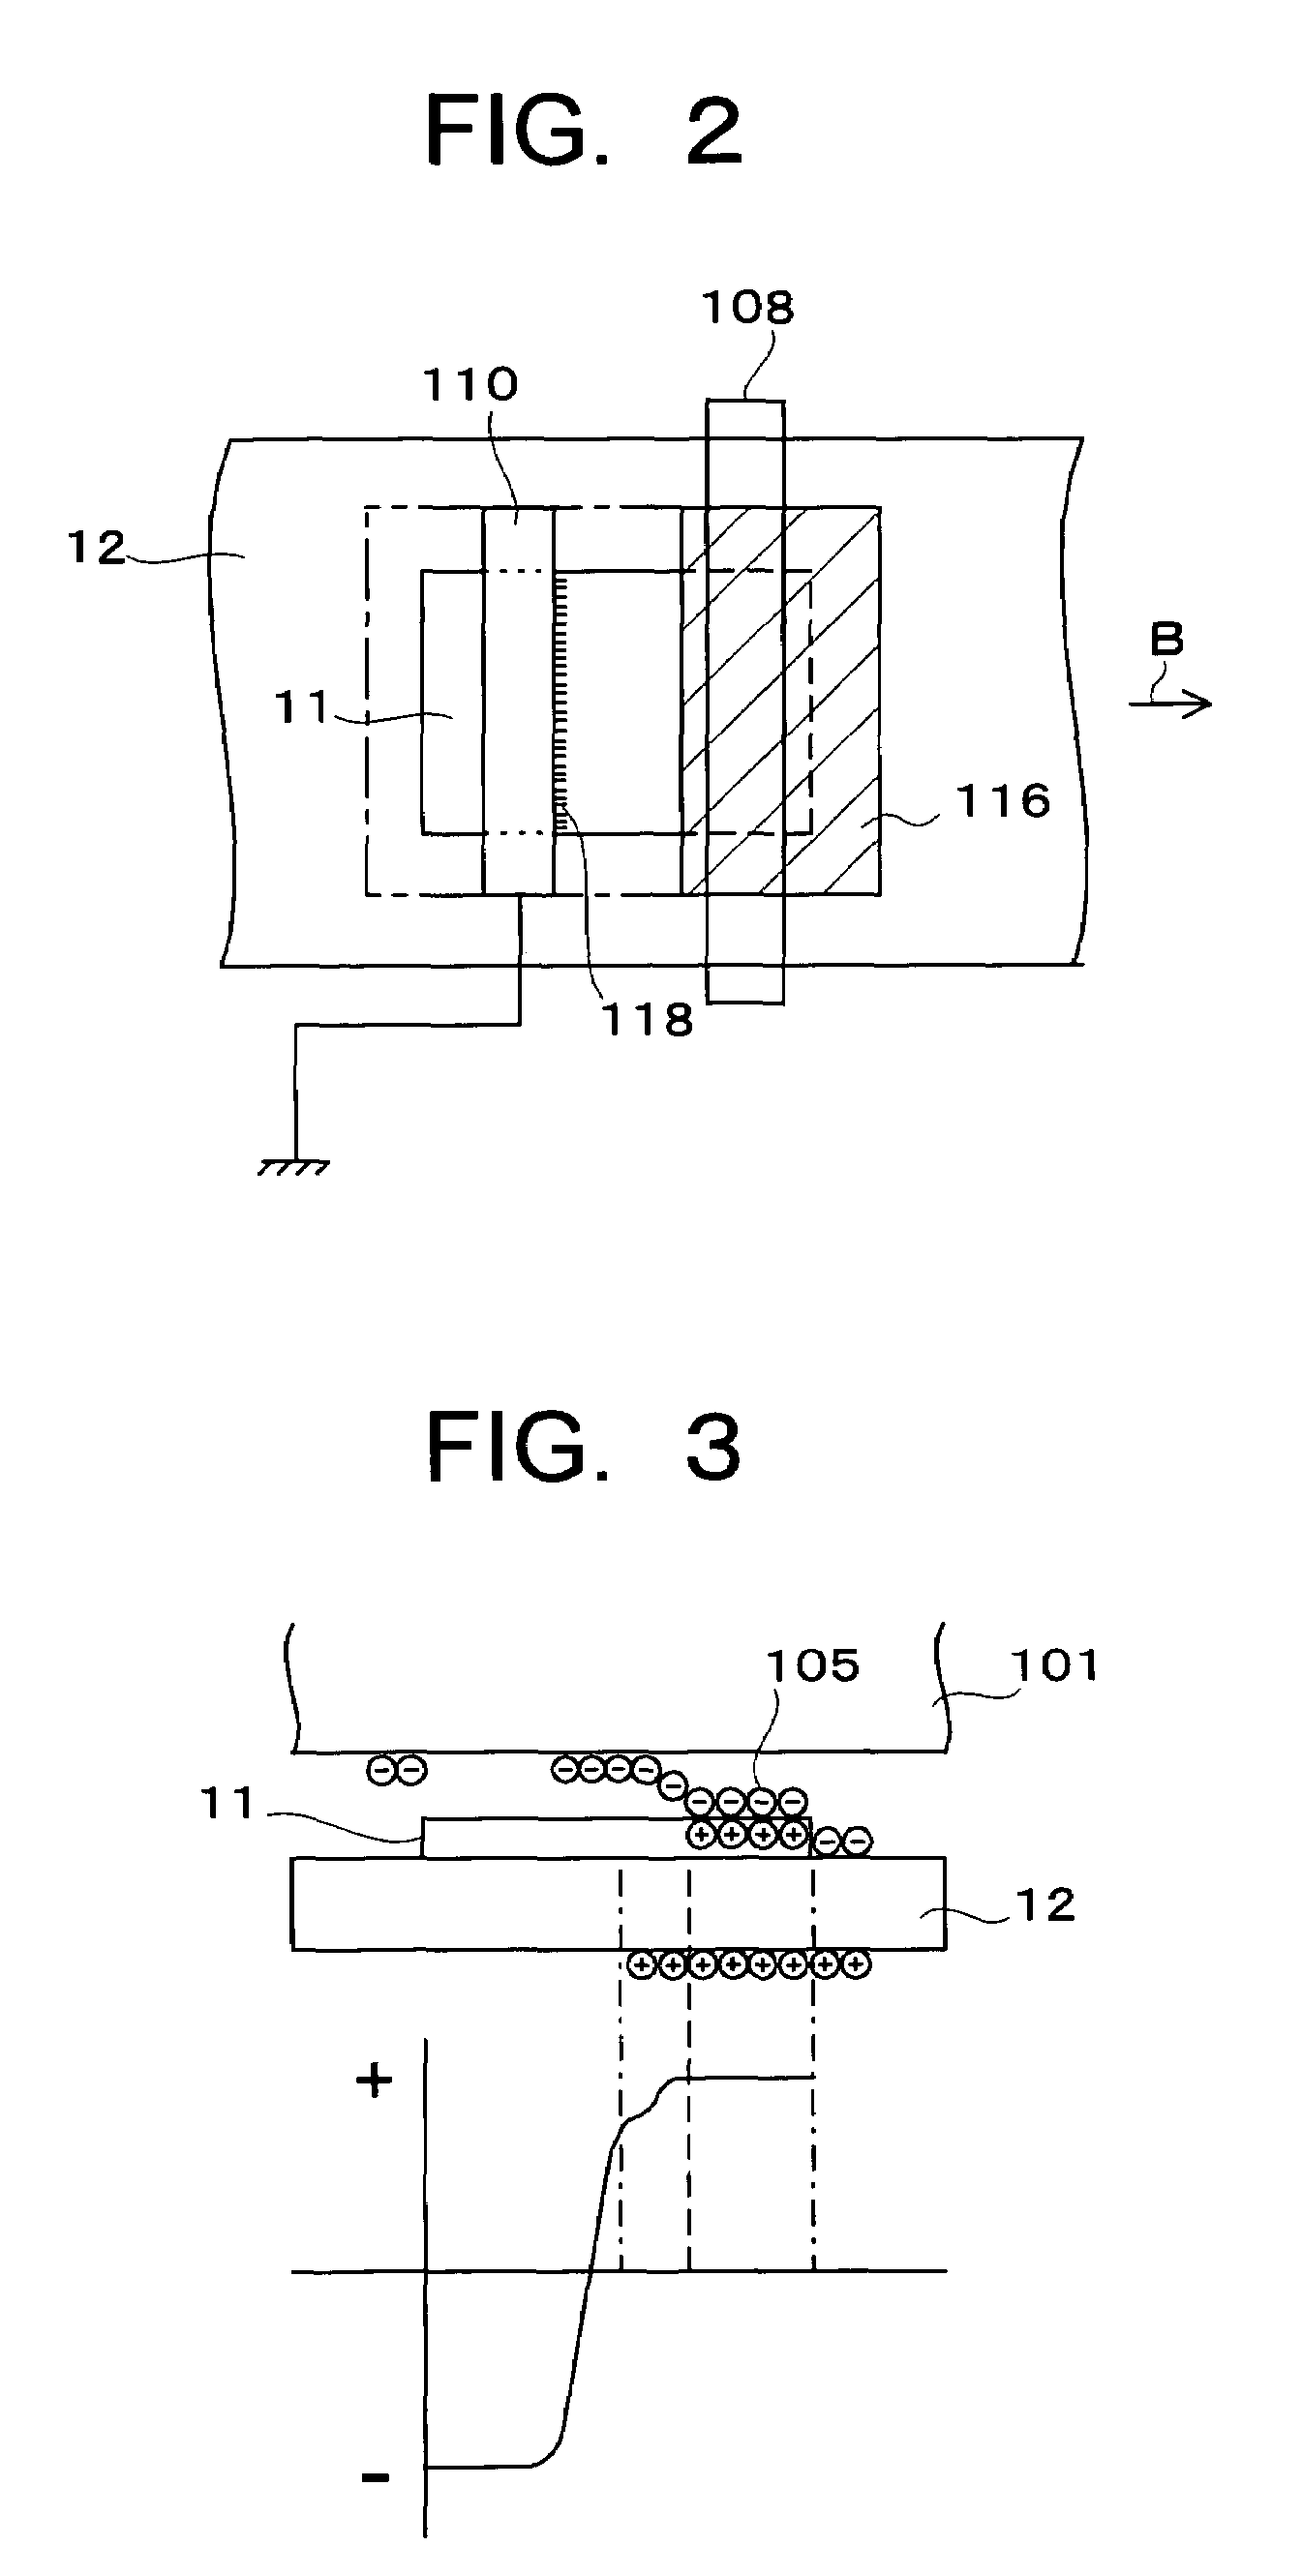 Image forming apparatus and method of manufacturing electronic circuit using the same